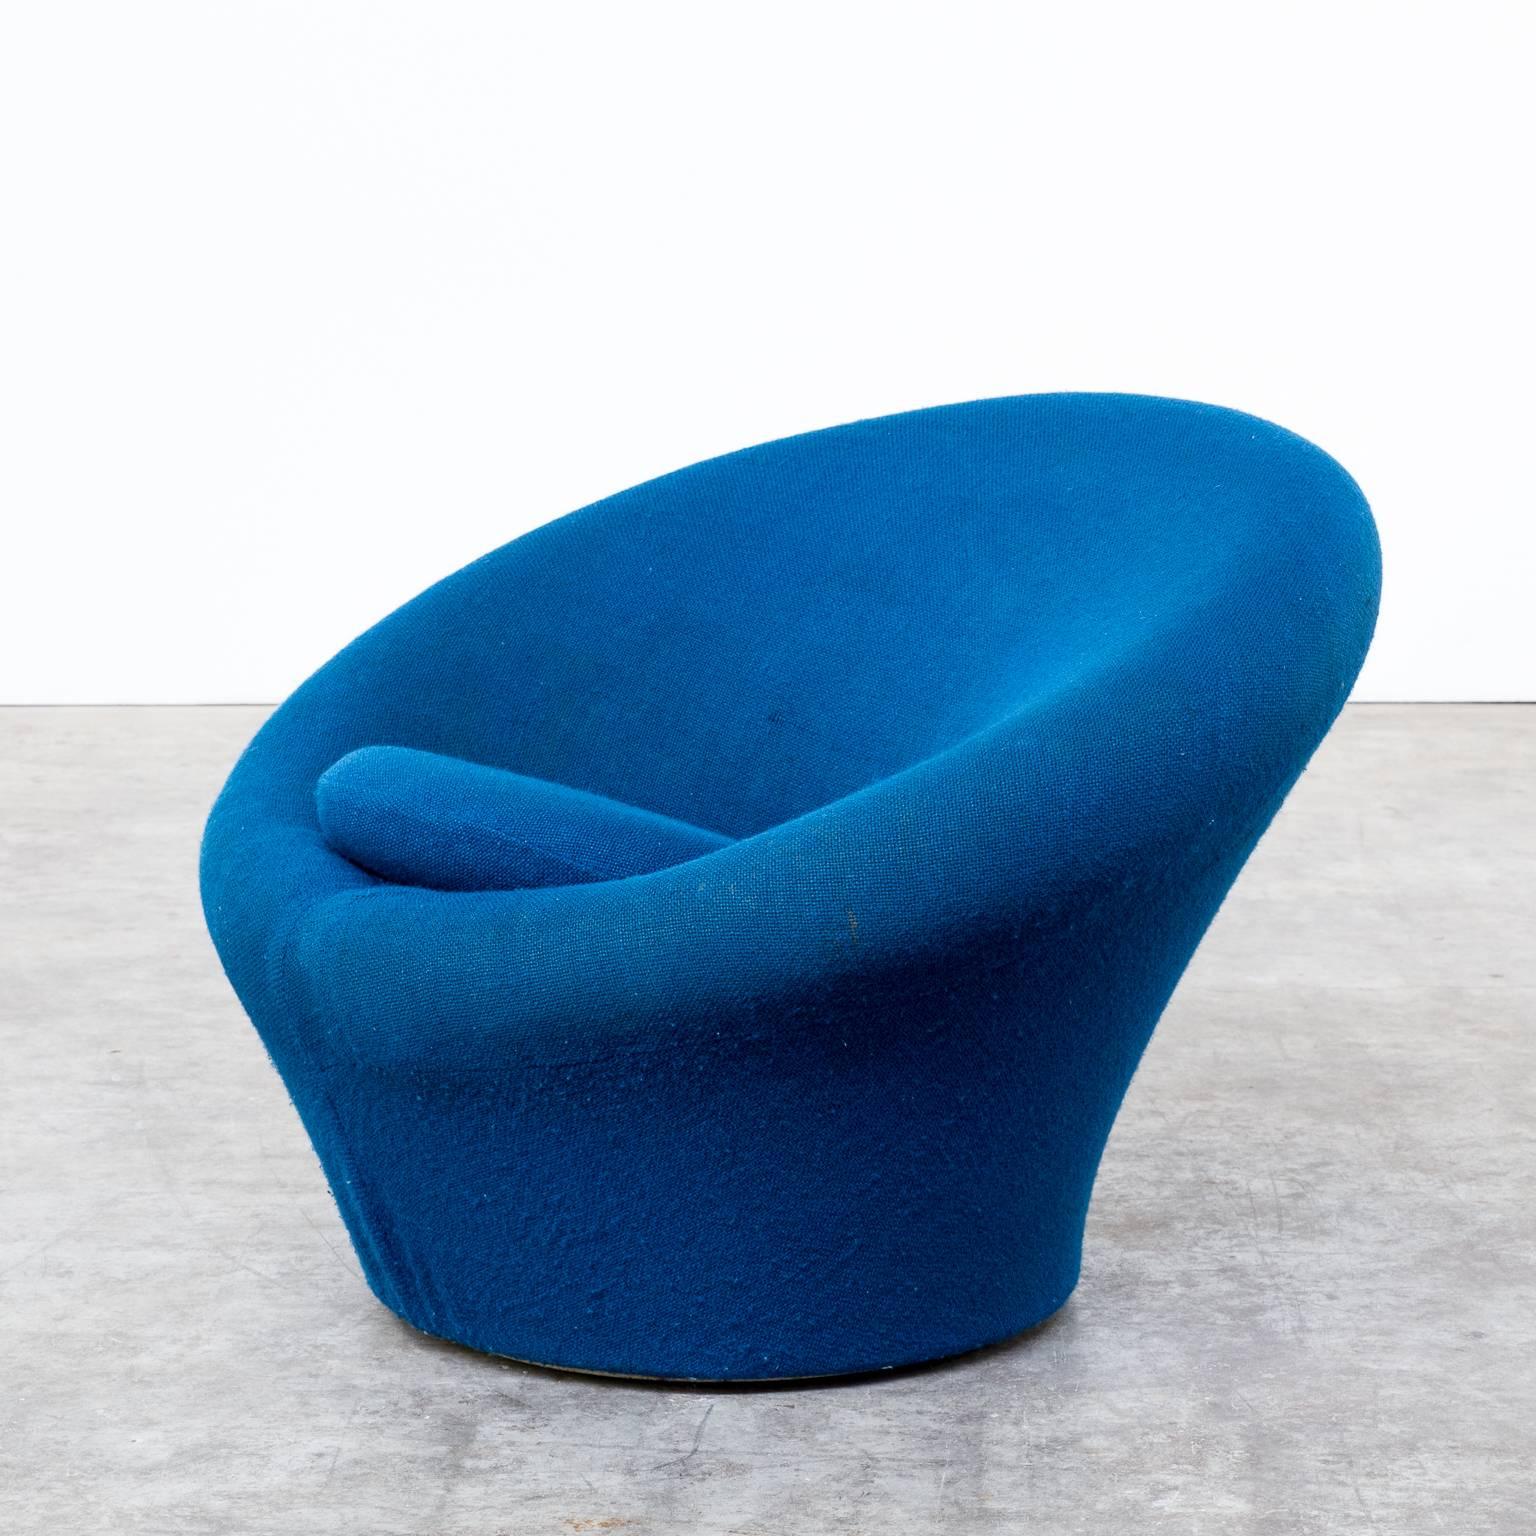 1960s Pierre Paulin ‘mushroom’ F560 fauteuil for Artifort. This model has been adopted permanently in the collection of the Museum of Modern Art in New York (MOMA). Good/fair condition, wear consistant with age and use. Dimensions: 88cm (W) x 80cm